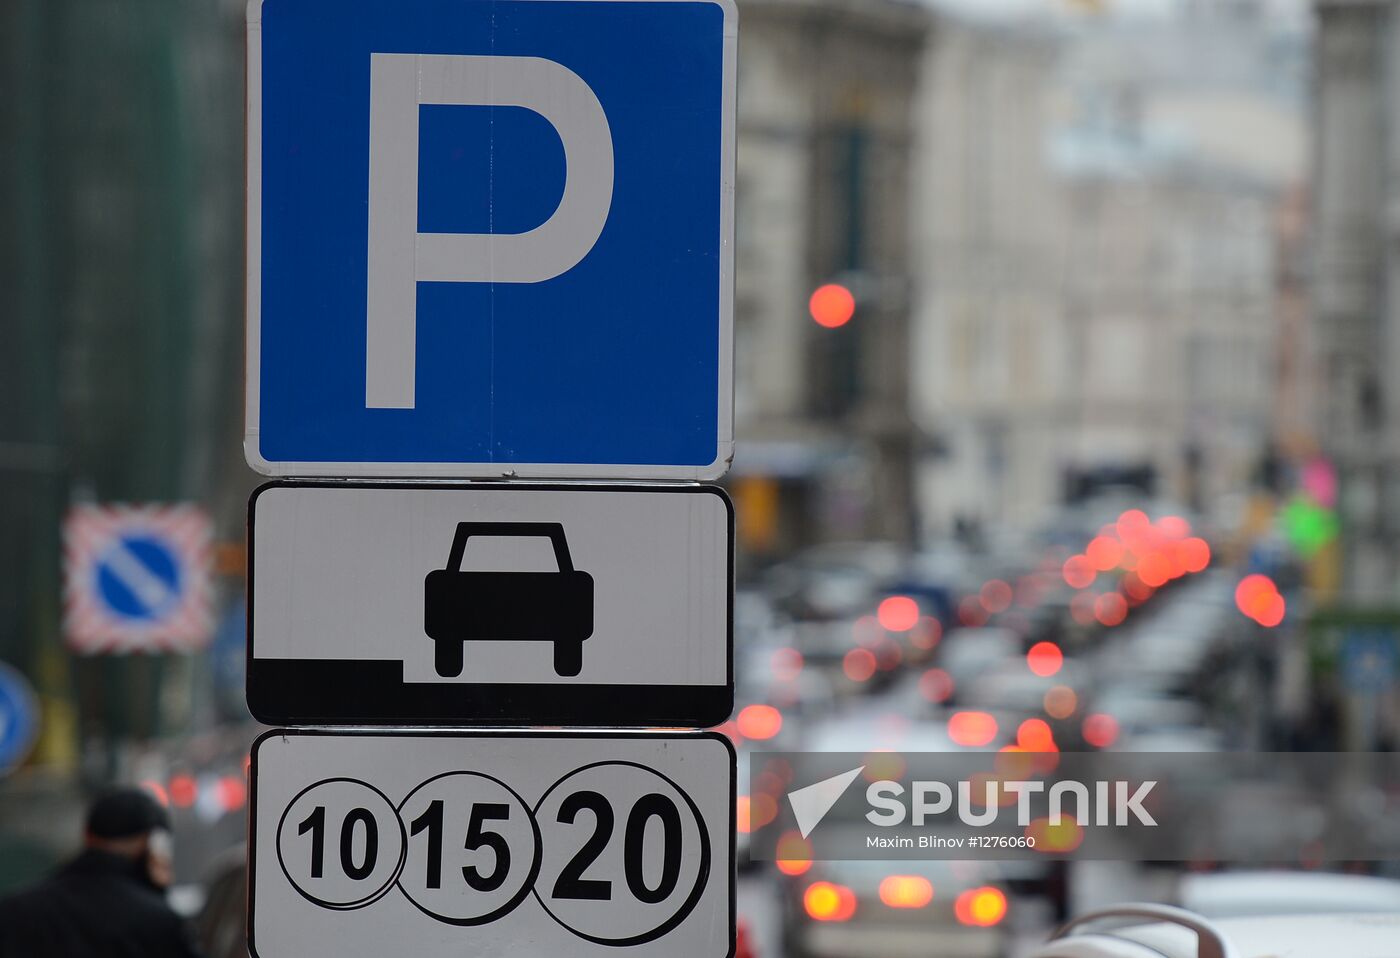 Paid parking lots in downtown Moscow